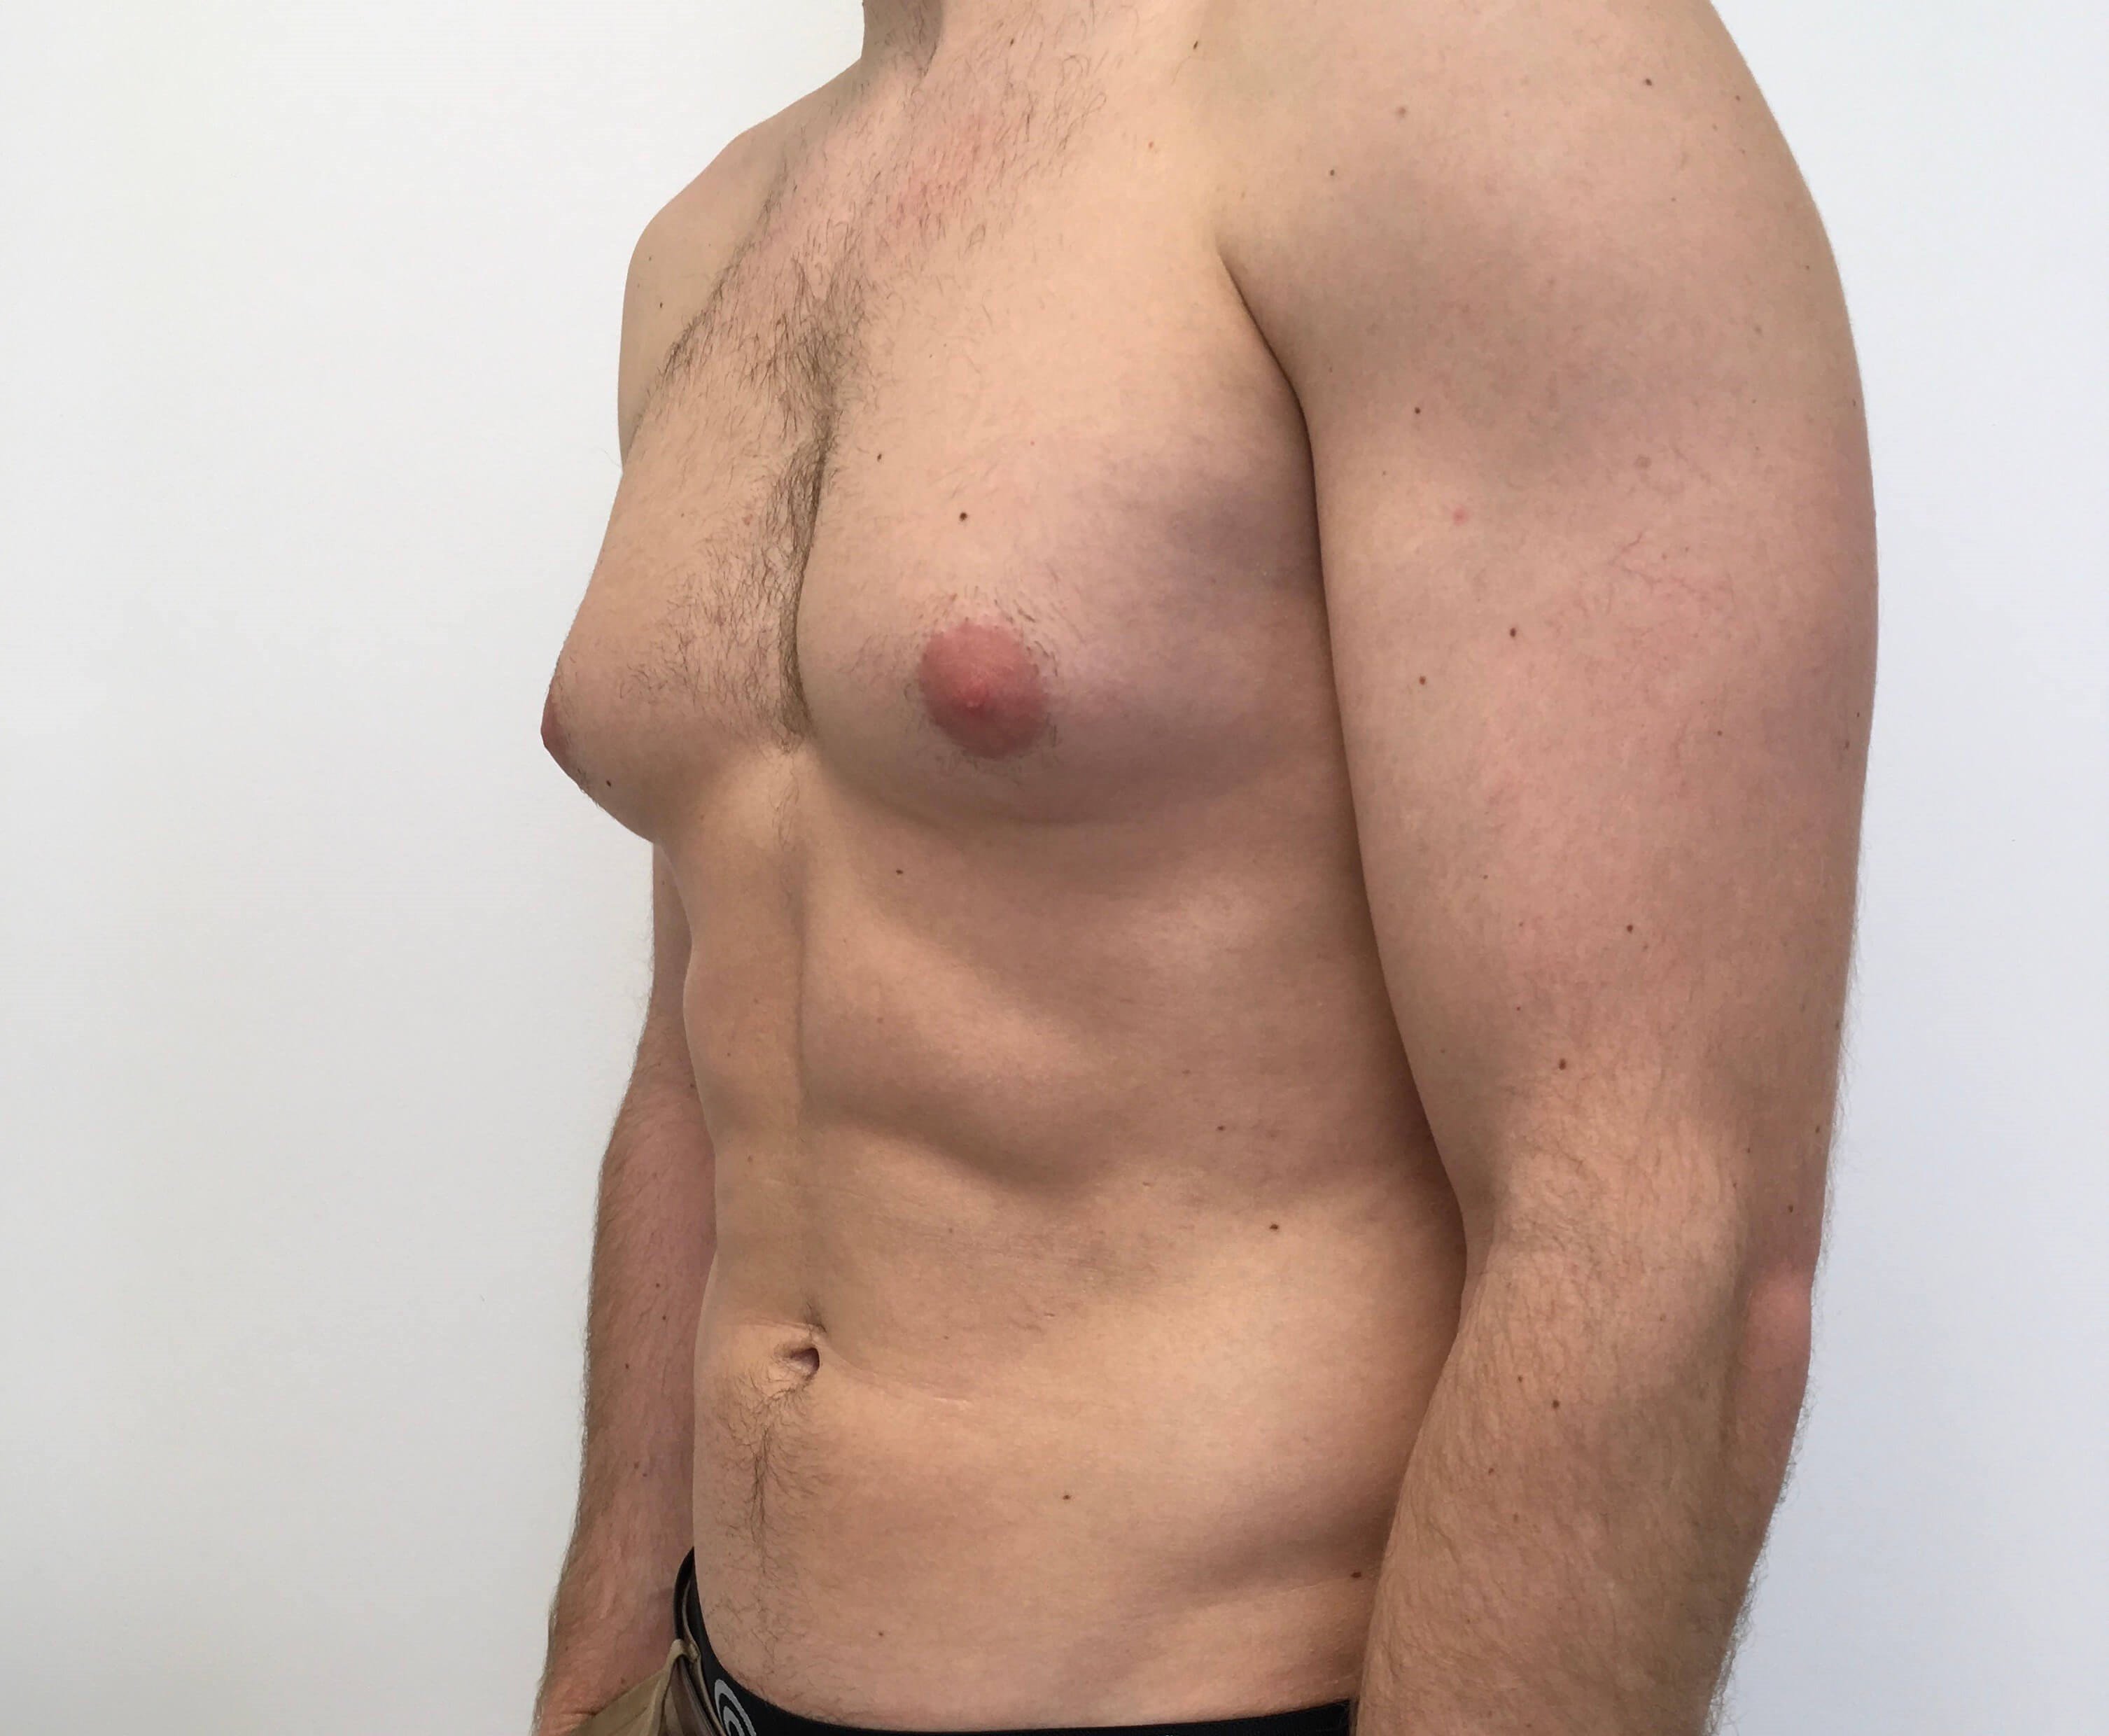 Male Breast Reduction FAQs: How Can I Get Rid of Gynecomastia Fast? featured image